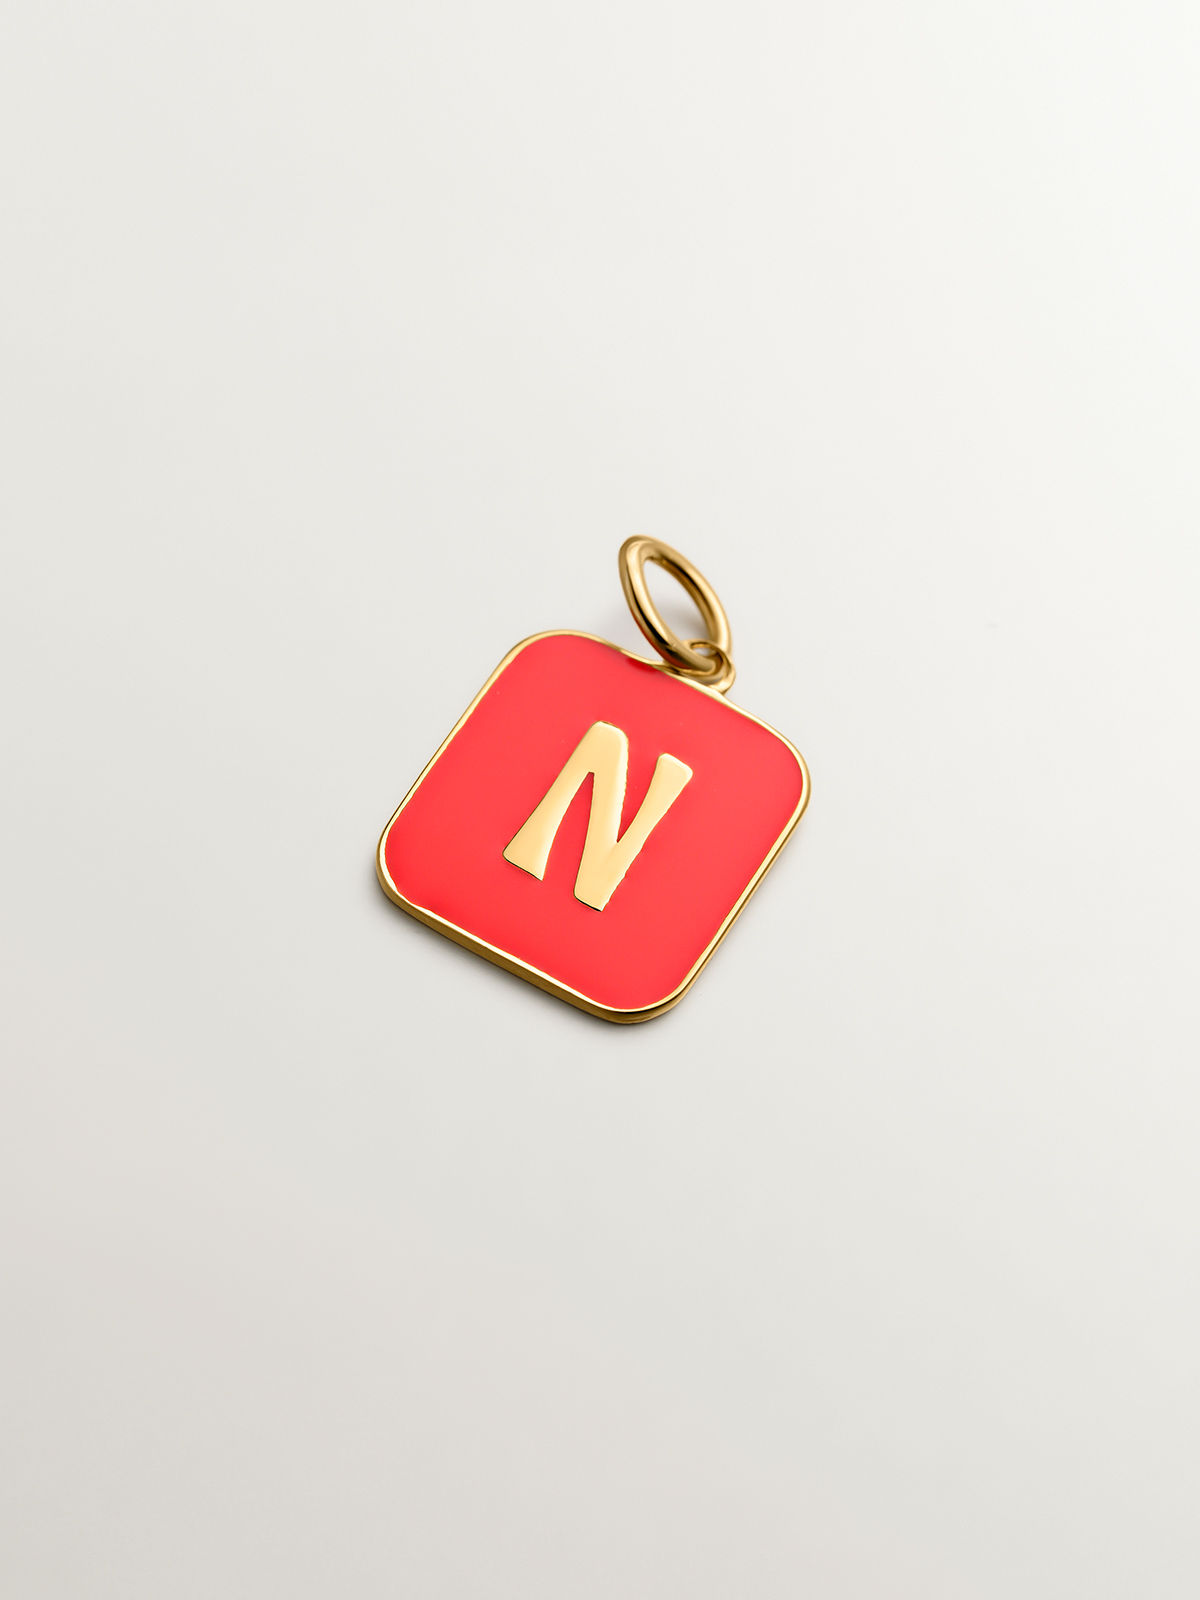 18K yellow gold plated 925 sterling silver charm with N initial and pink enamel in a square shape